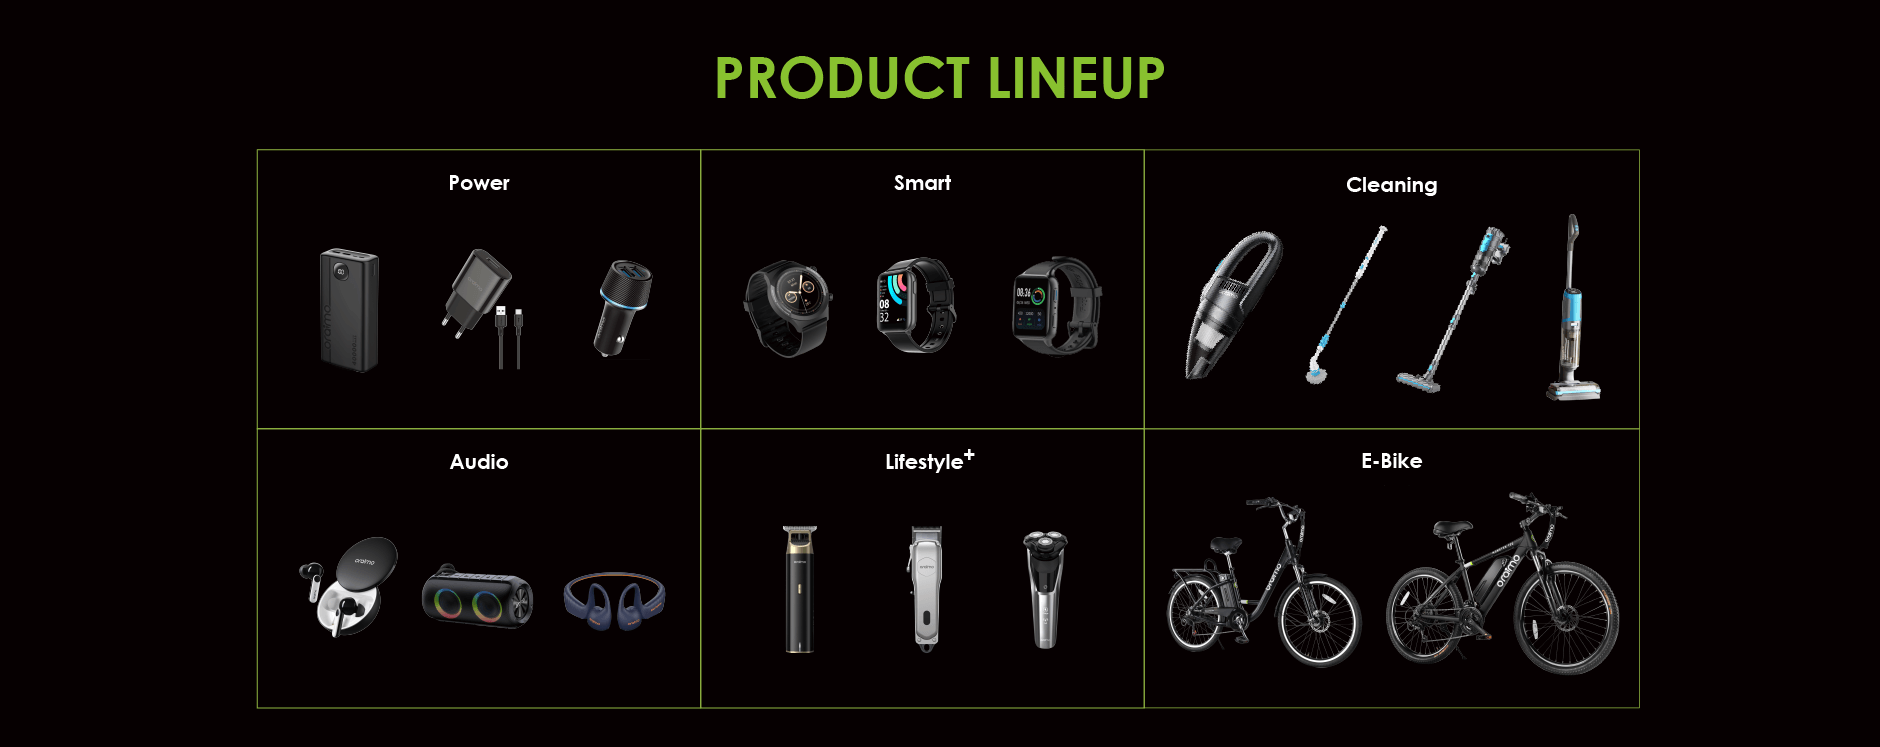 oraimo's product lineup